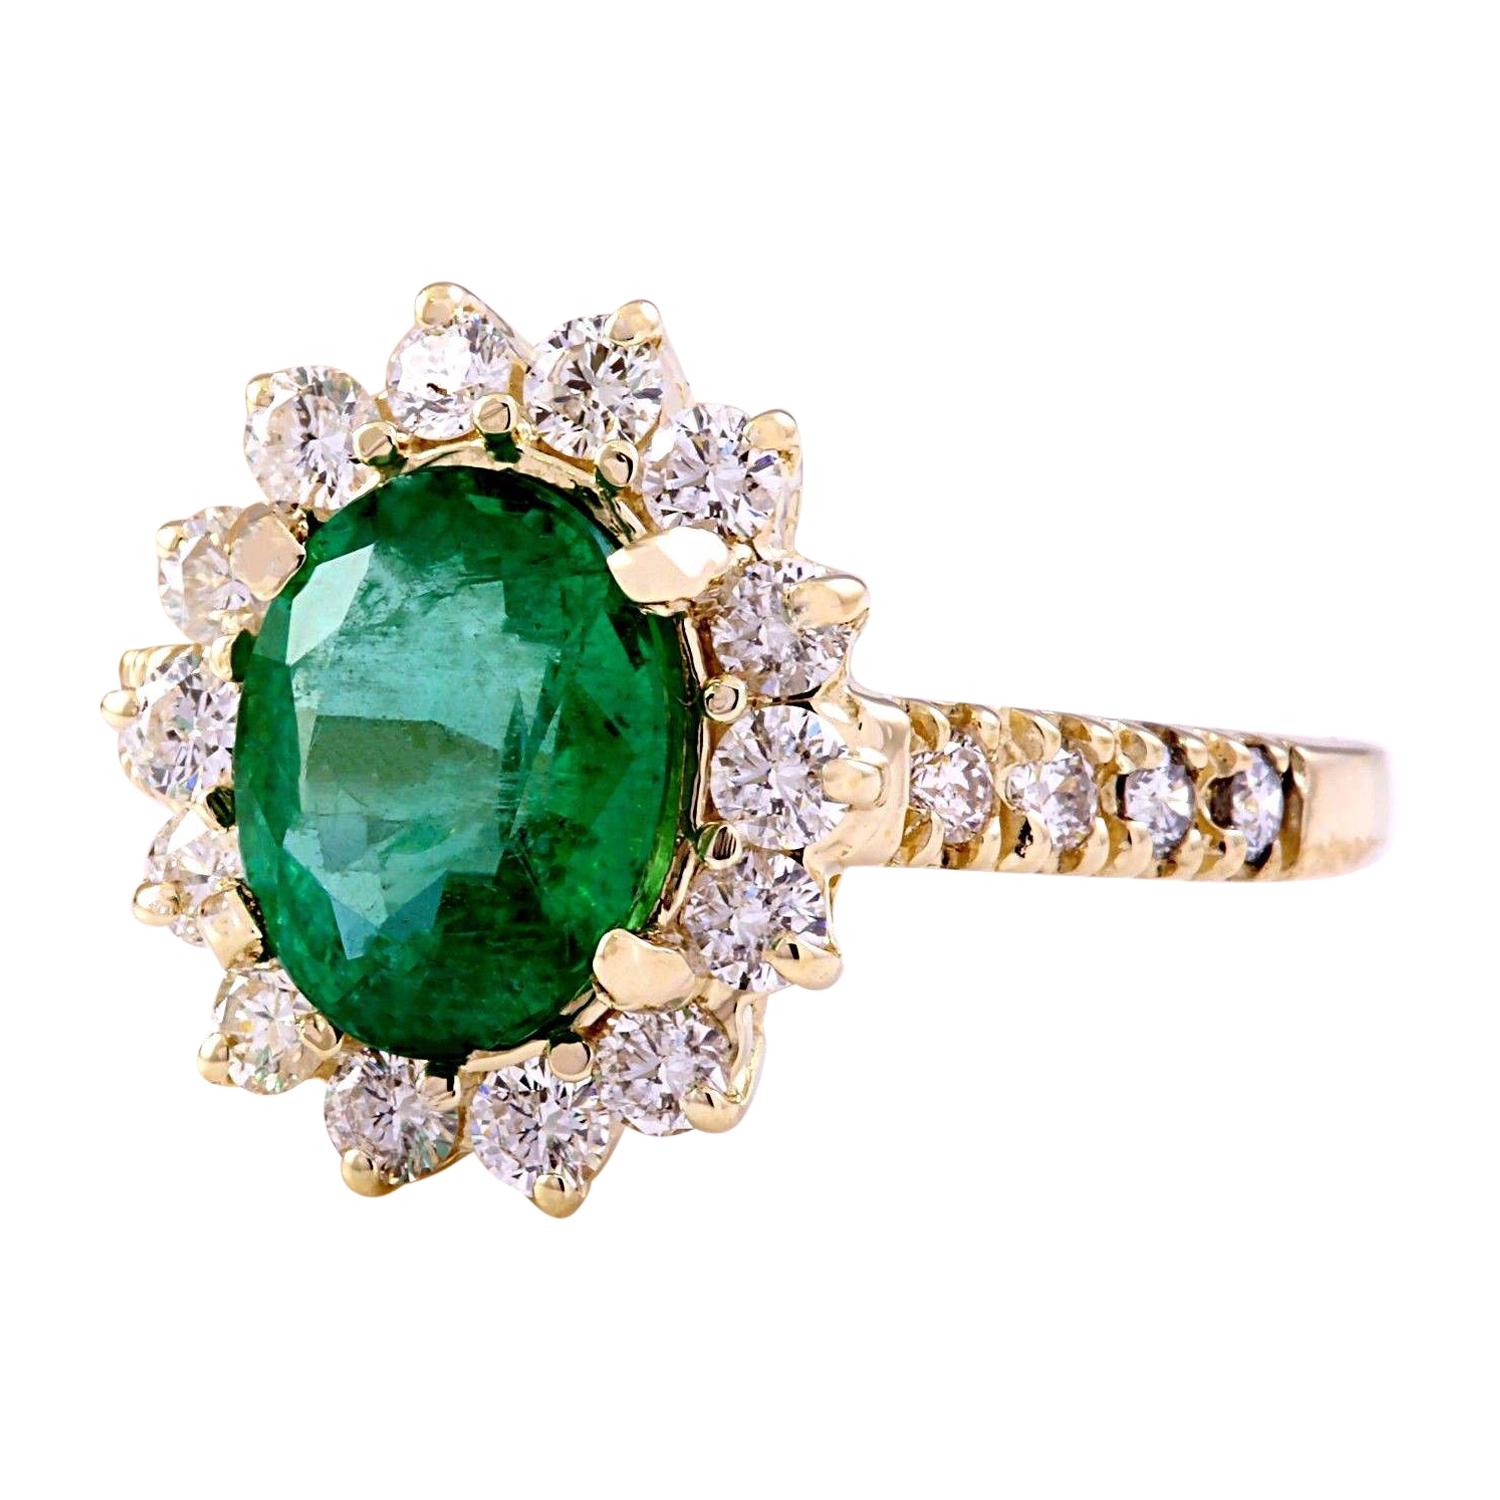 3.03 Carat Natural Emerald 14K Solid Yellow Gold Diamond Ring
 Item Type: Ring
 Item Style: Engagement
 Material: 14K Yellow Gold
 Mainstone: Emerald
 Stone Color: Green
 Stone Weight: 2.03 Carat
 Stone Shape: Oval
 Stone Quantity: 1
 Stone